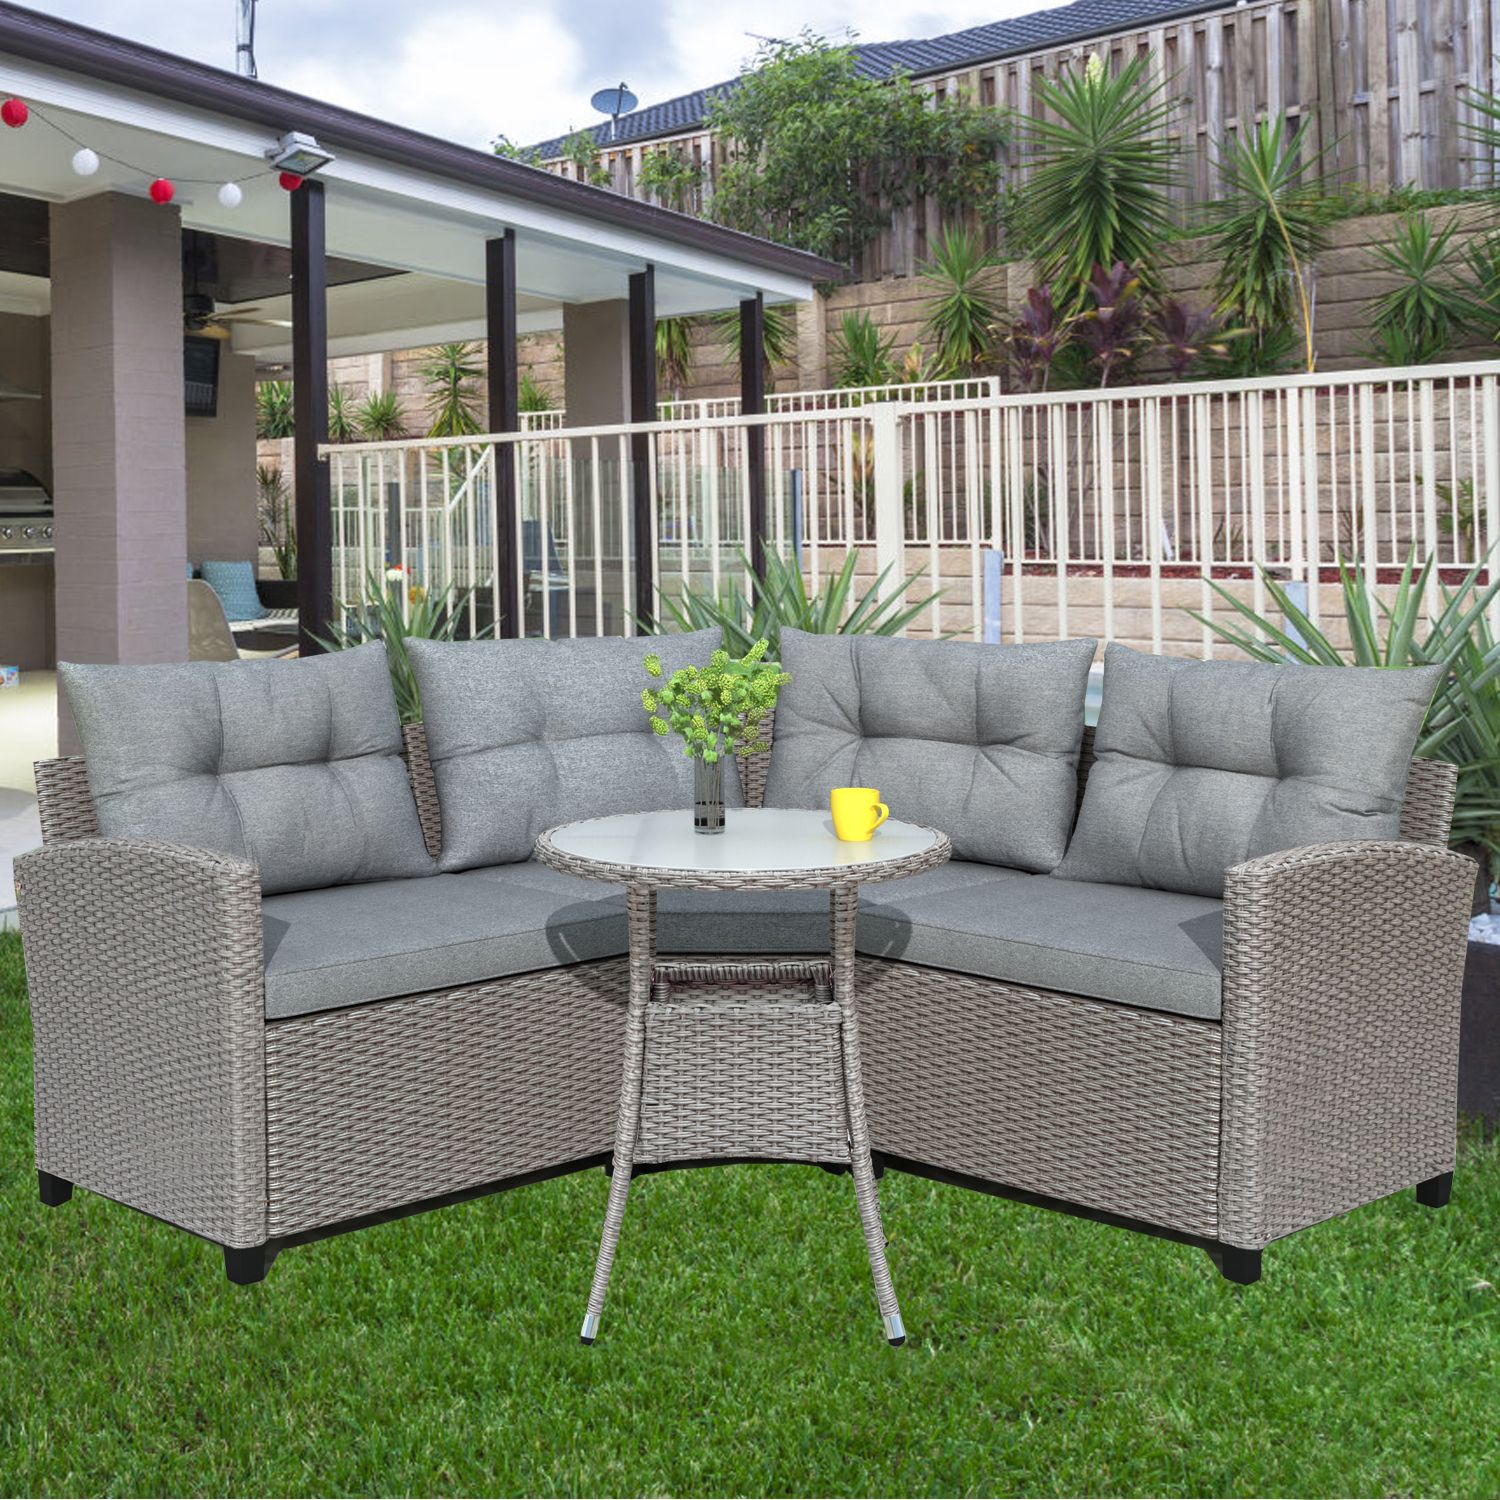 2019 4 Piece Outdoor Patio Sofa Furniture Sets, Gray Rattan Wicker Patio Set With Gray Outdoor Table And Loveseat Sets (View 2 of 15)